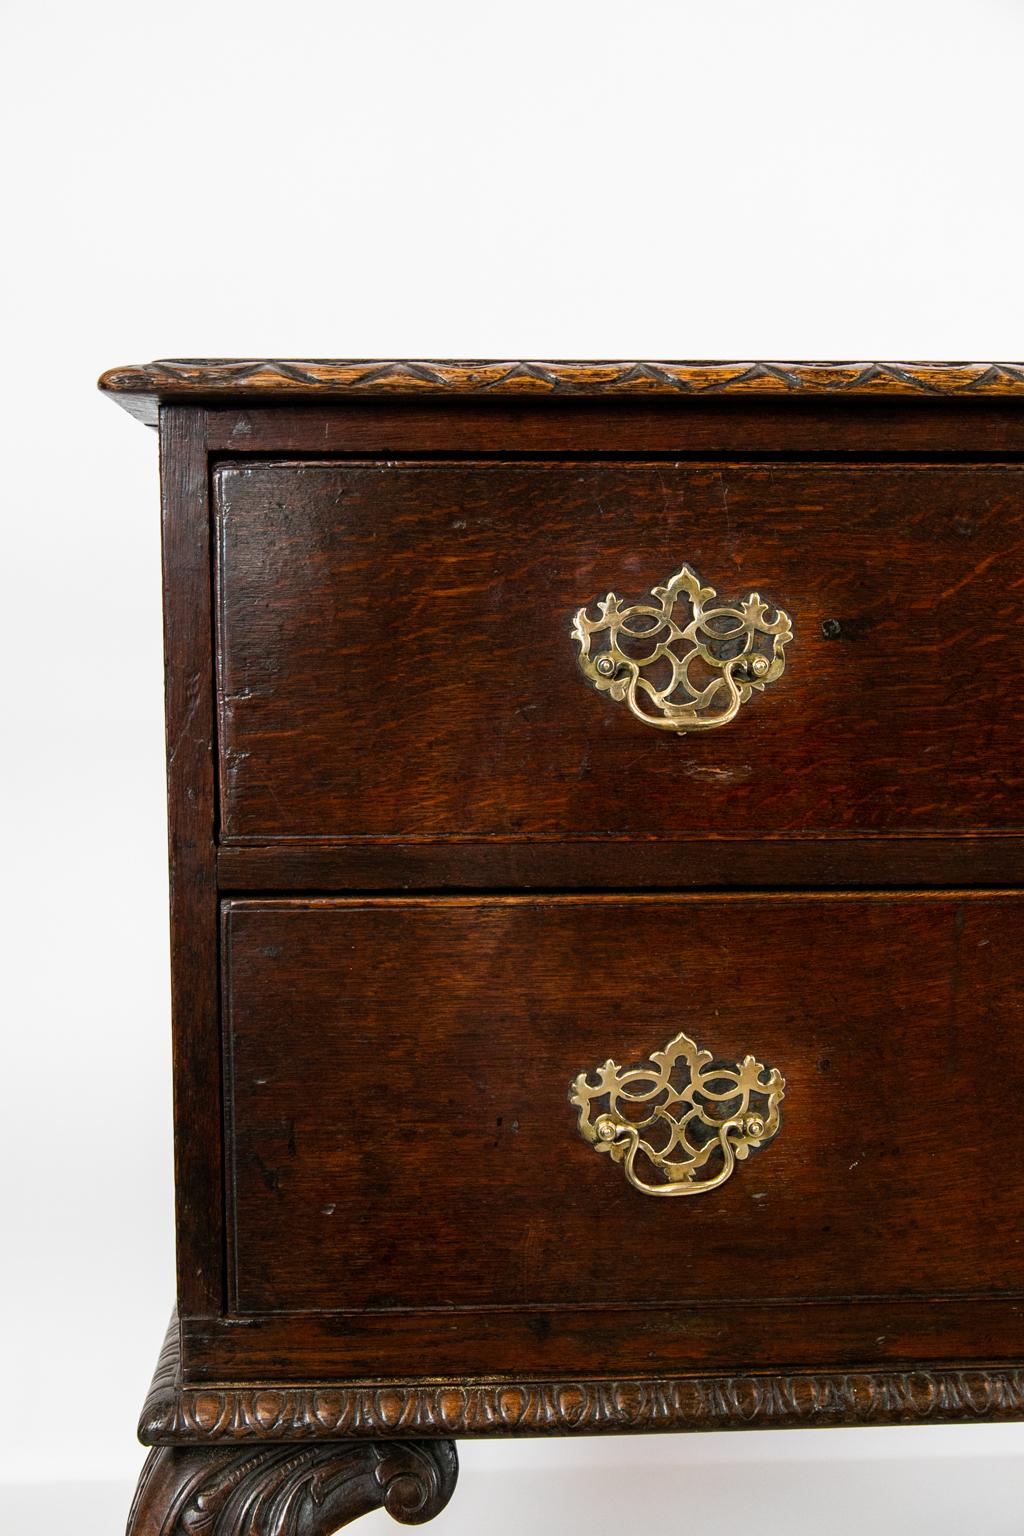 Late 18th Century Carved English Oak Two-Drawer Chest on Legs